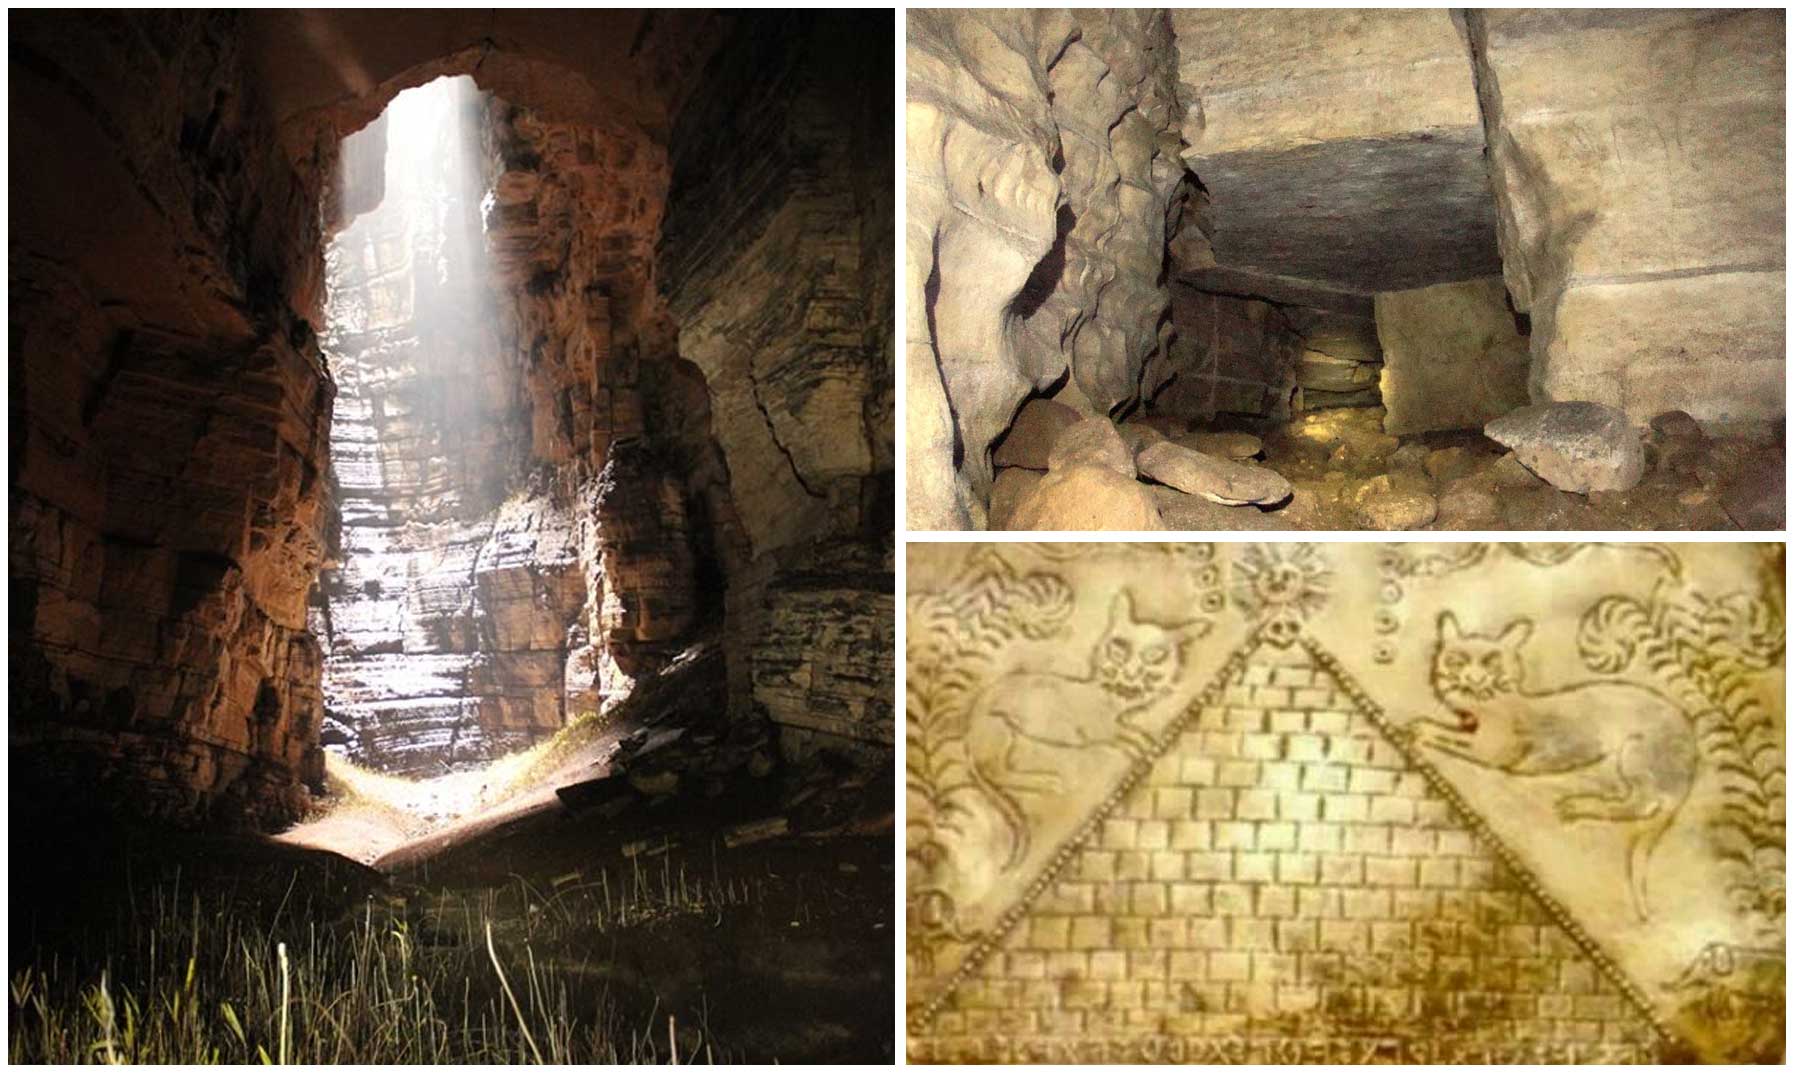 The truth about the South American Tunnel: a 4,000 km long artificial cave containing artifacts alluding to a high-tech empire that once existed (P1) - Photo 2.